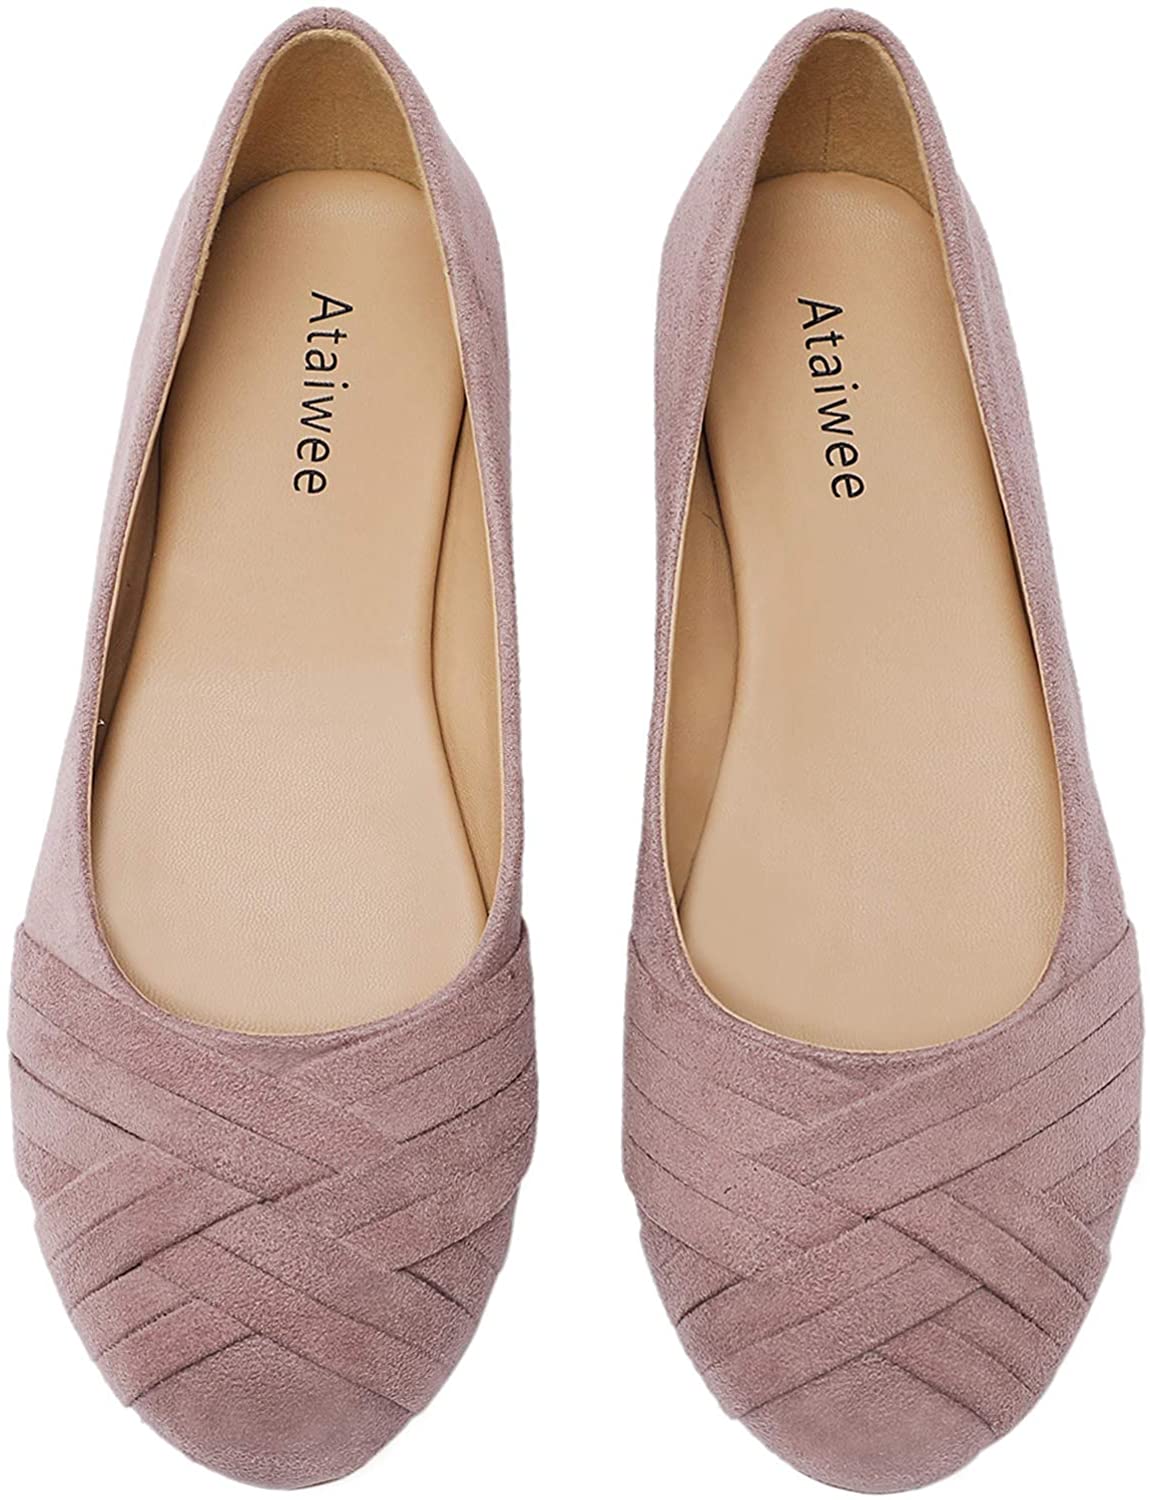 Round Toe Suede Classic Cozy Cute Slip-on Flat Shoes. Ataiwee Womens Ballet Flats